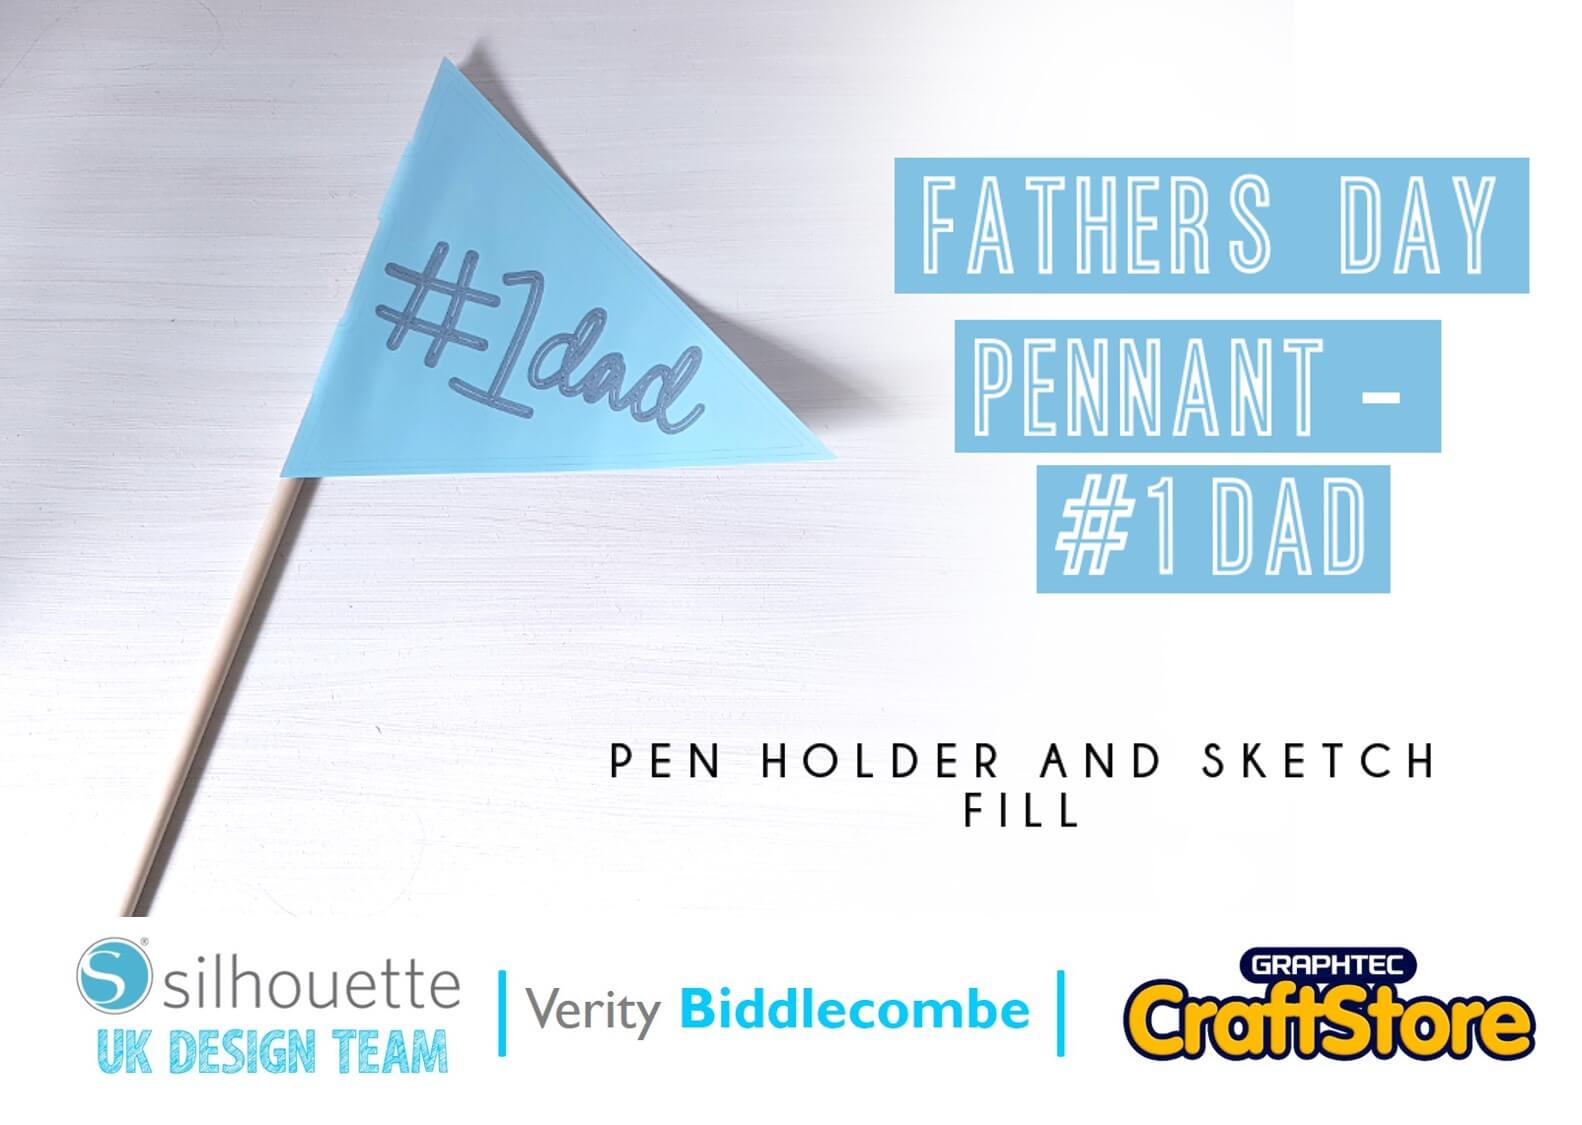 silhouette uk blog - verity biddlecombe - fathers day pennant - main